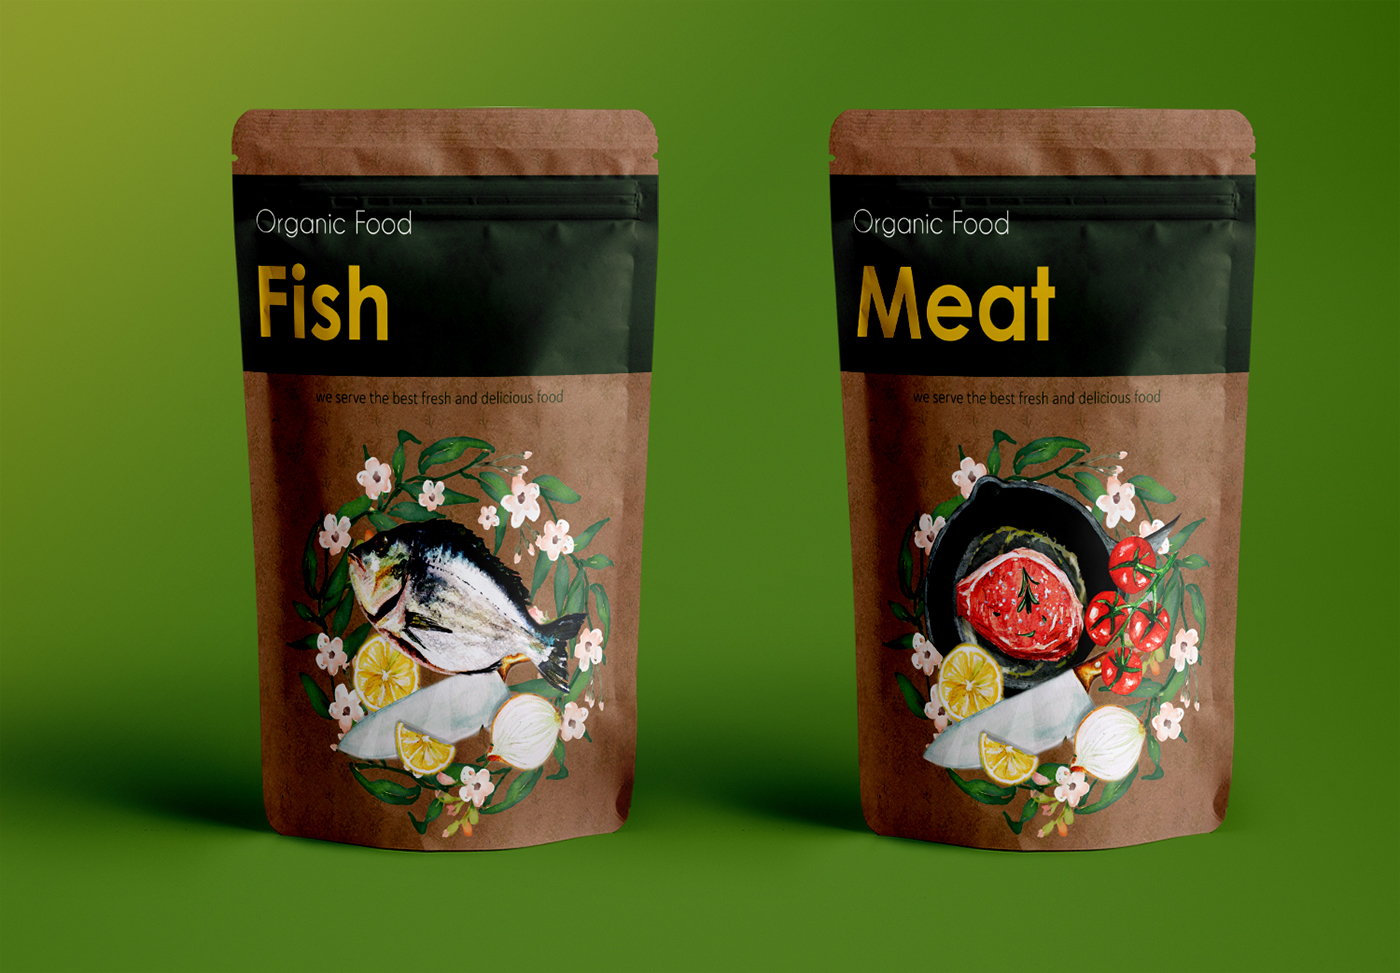 Organic Food Packaging Campaign | Behance